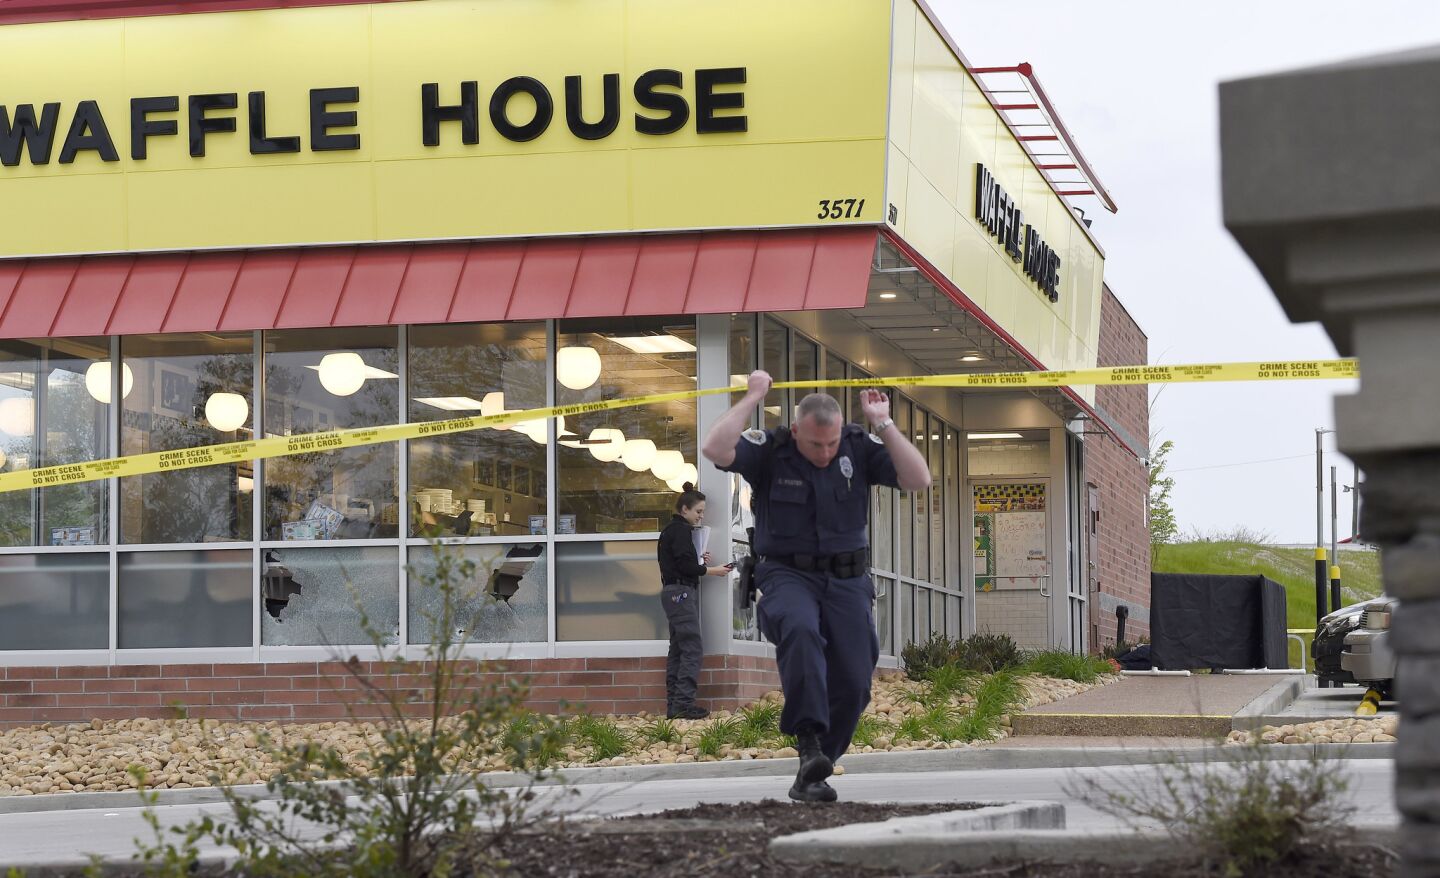 Law enforcement officials work the scene of a fatal shooting at a Waffle House in the Antioch neighborhood of Nashville on Sunday.